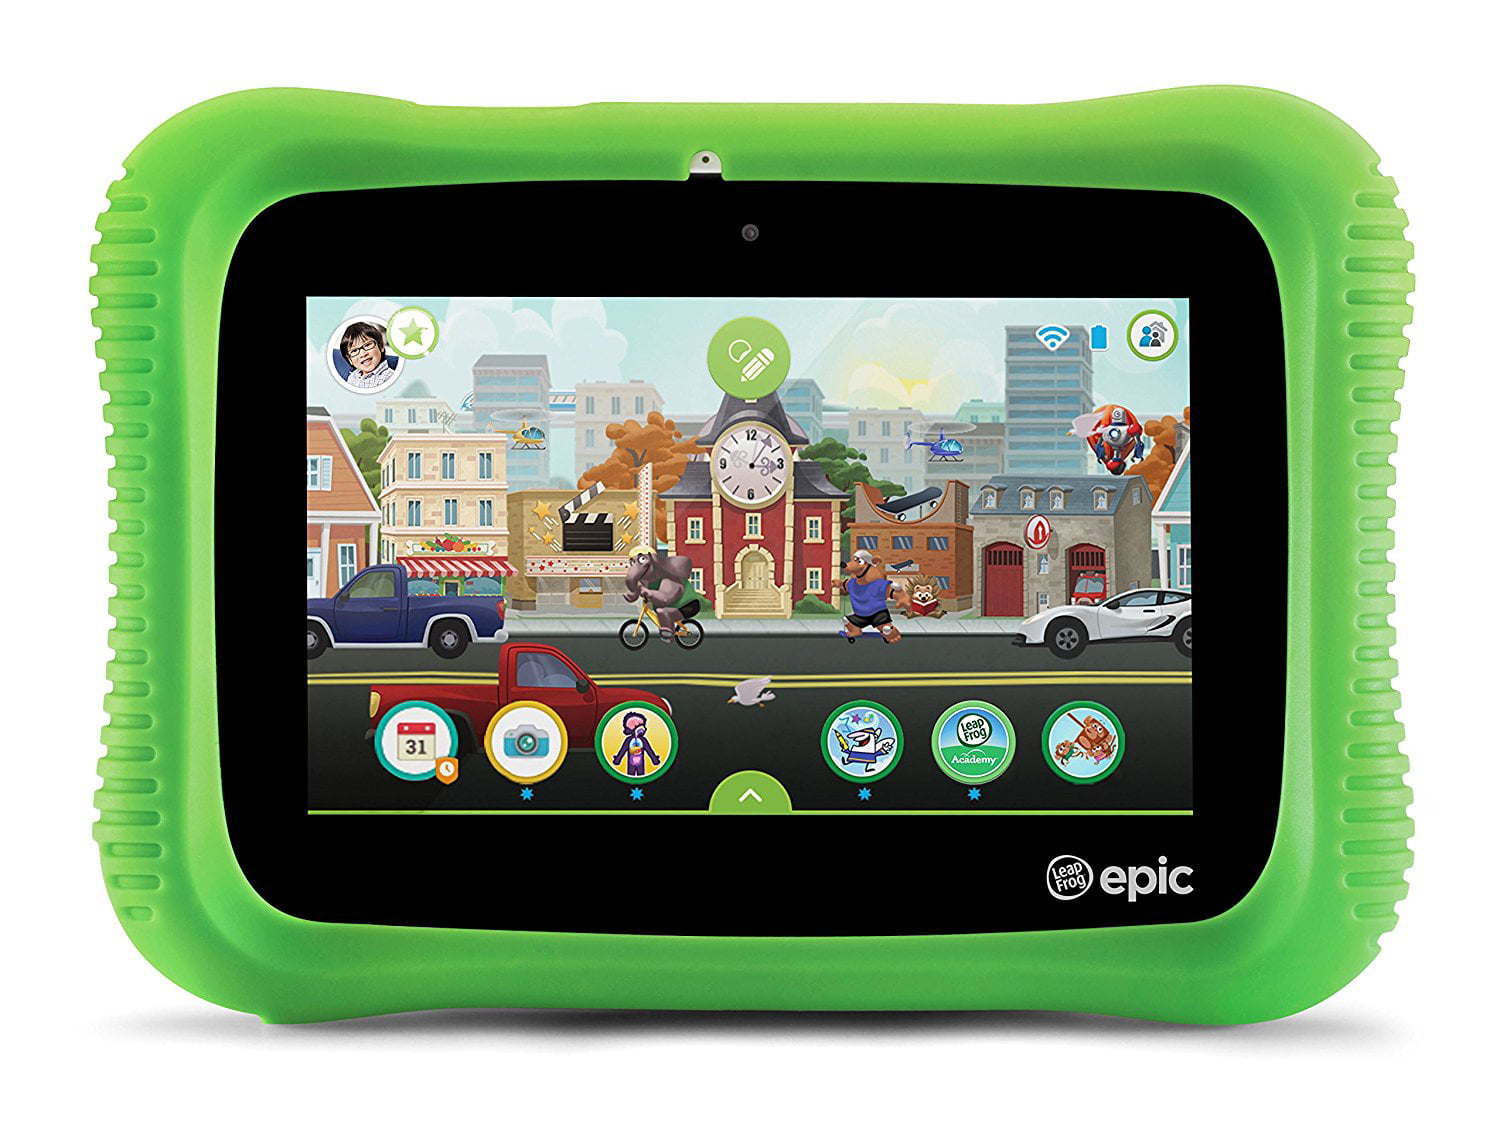 LeapFrog Epic Academy Edition 7-Inch Touchscreen Kids Tablet with 1.3 GHz Quad-Core Processor 16GB Memory and Android OS, Green (New Open Box)